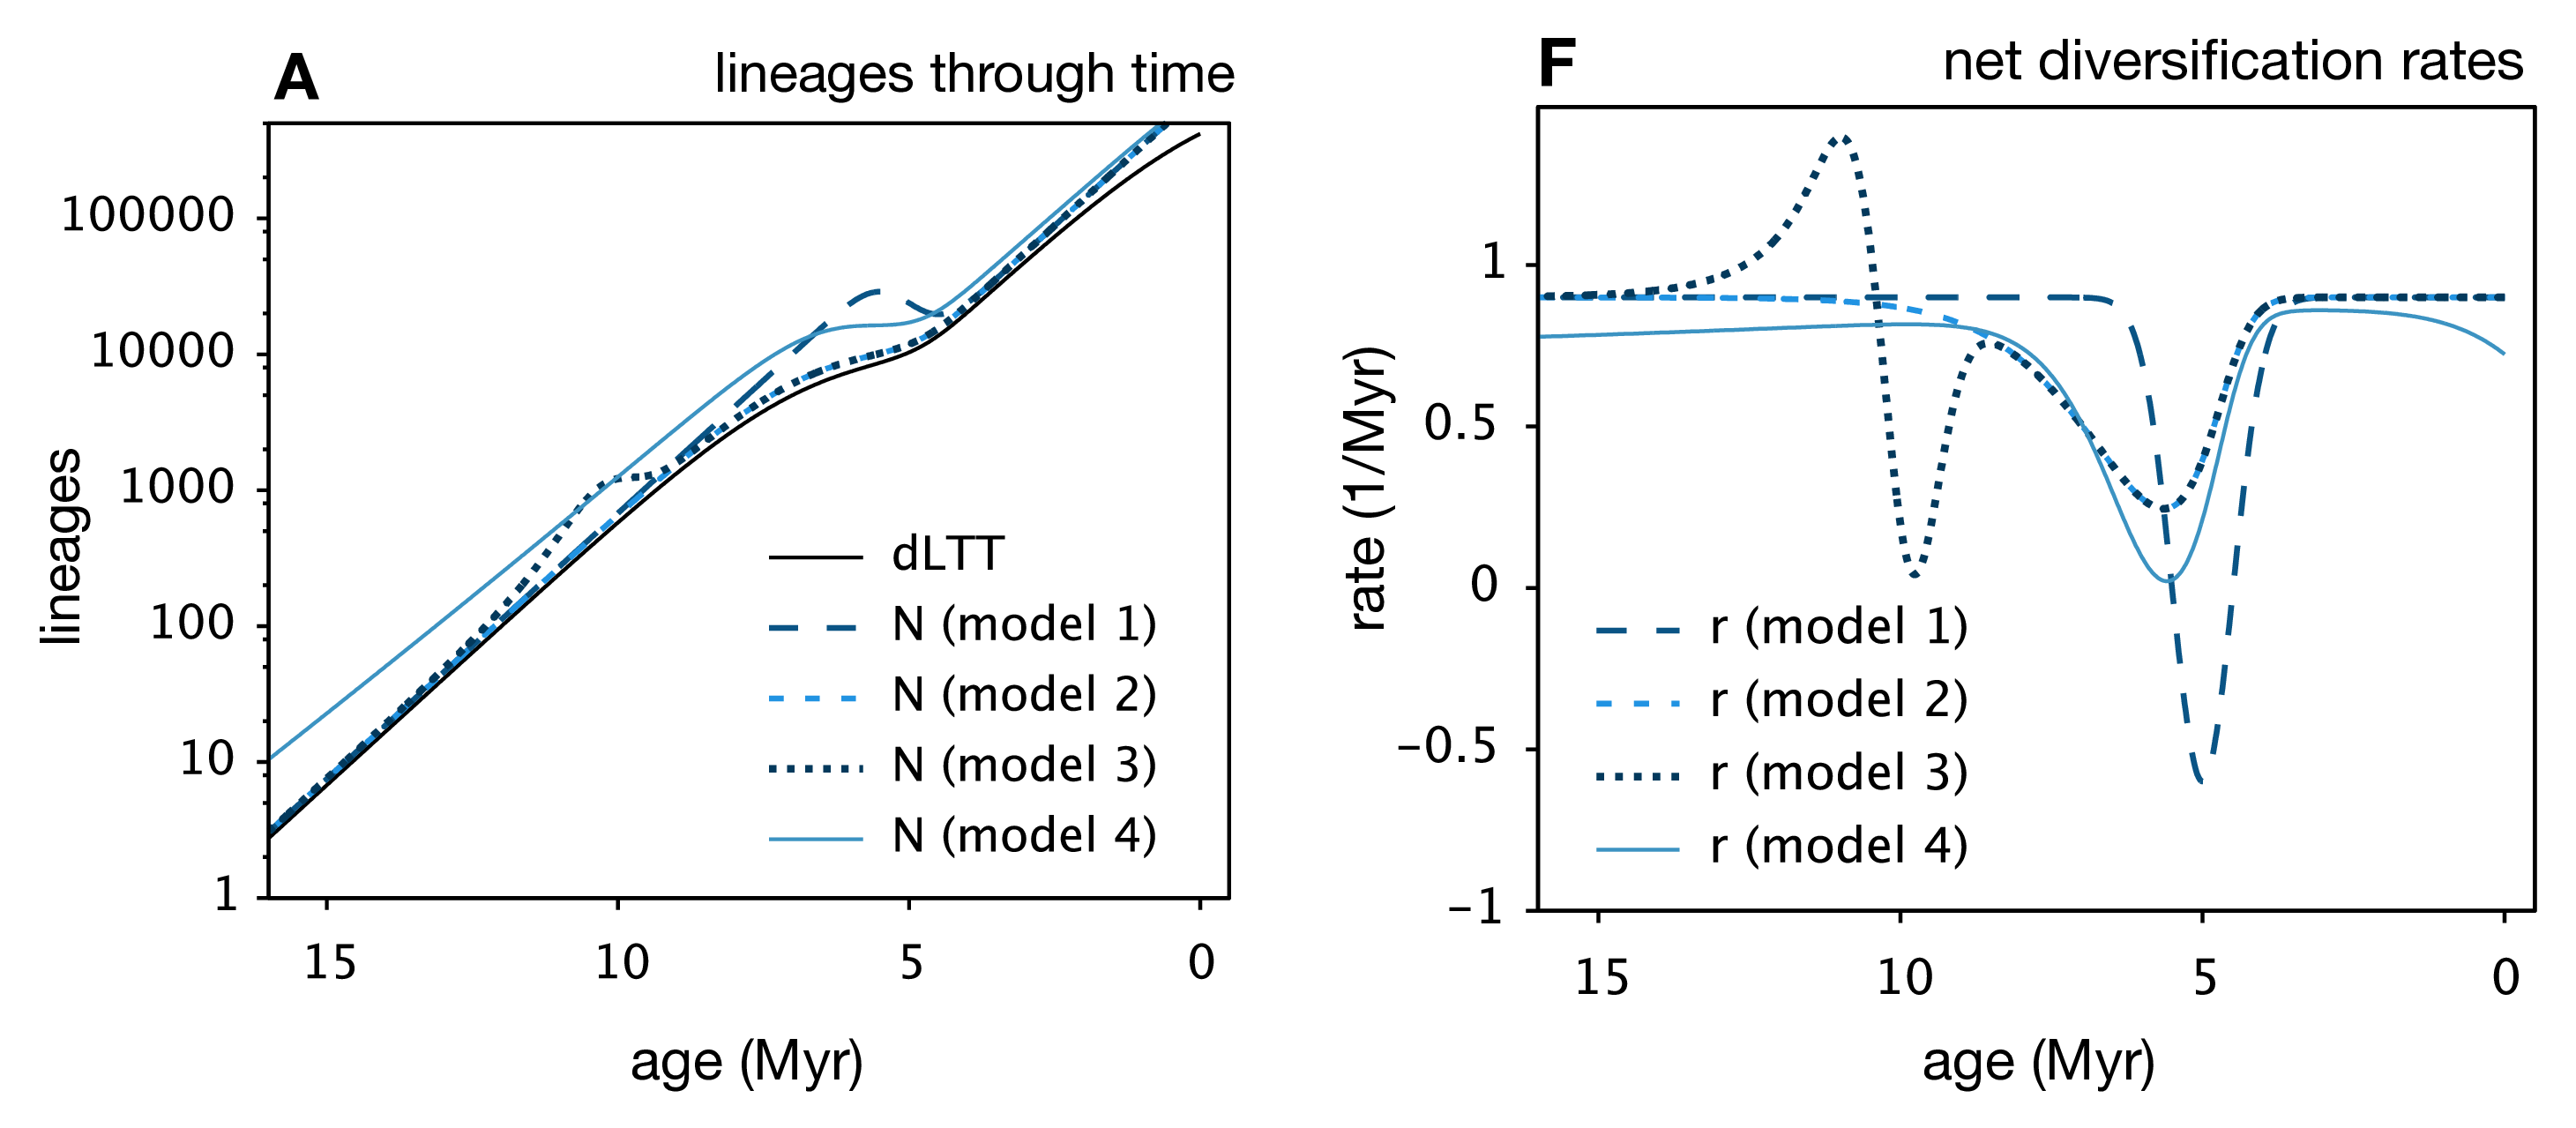 Lineage-through-time plot of four similar looking models, but with very different diversification rate histories. Modified from Figure 1 of Louca & Pennell 2019.